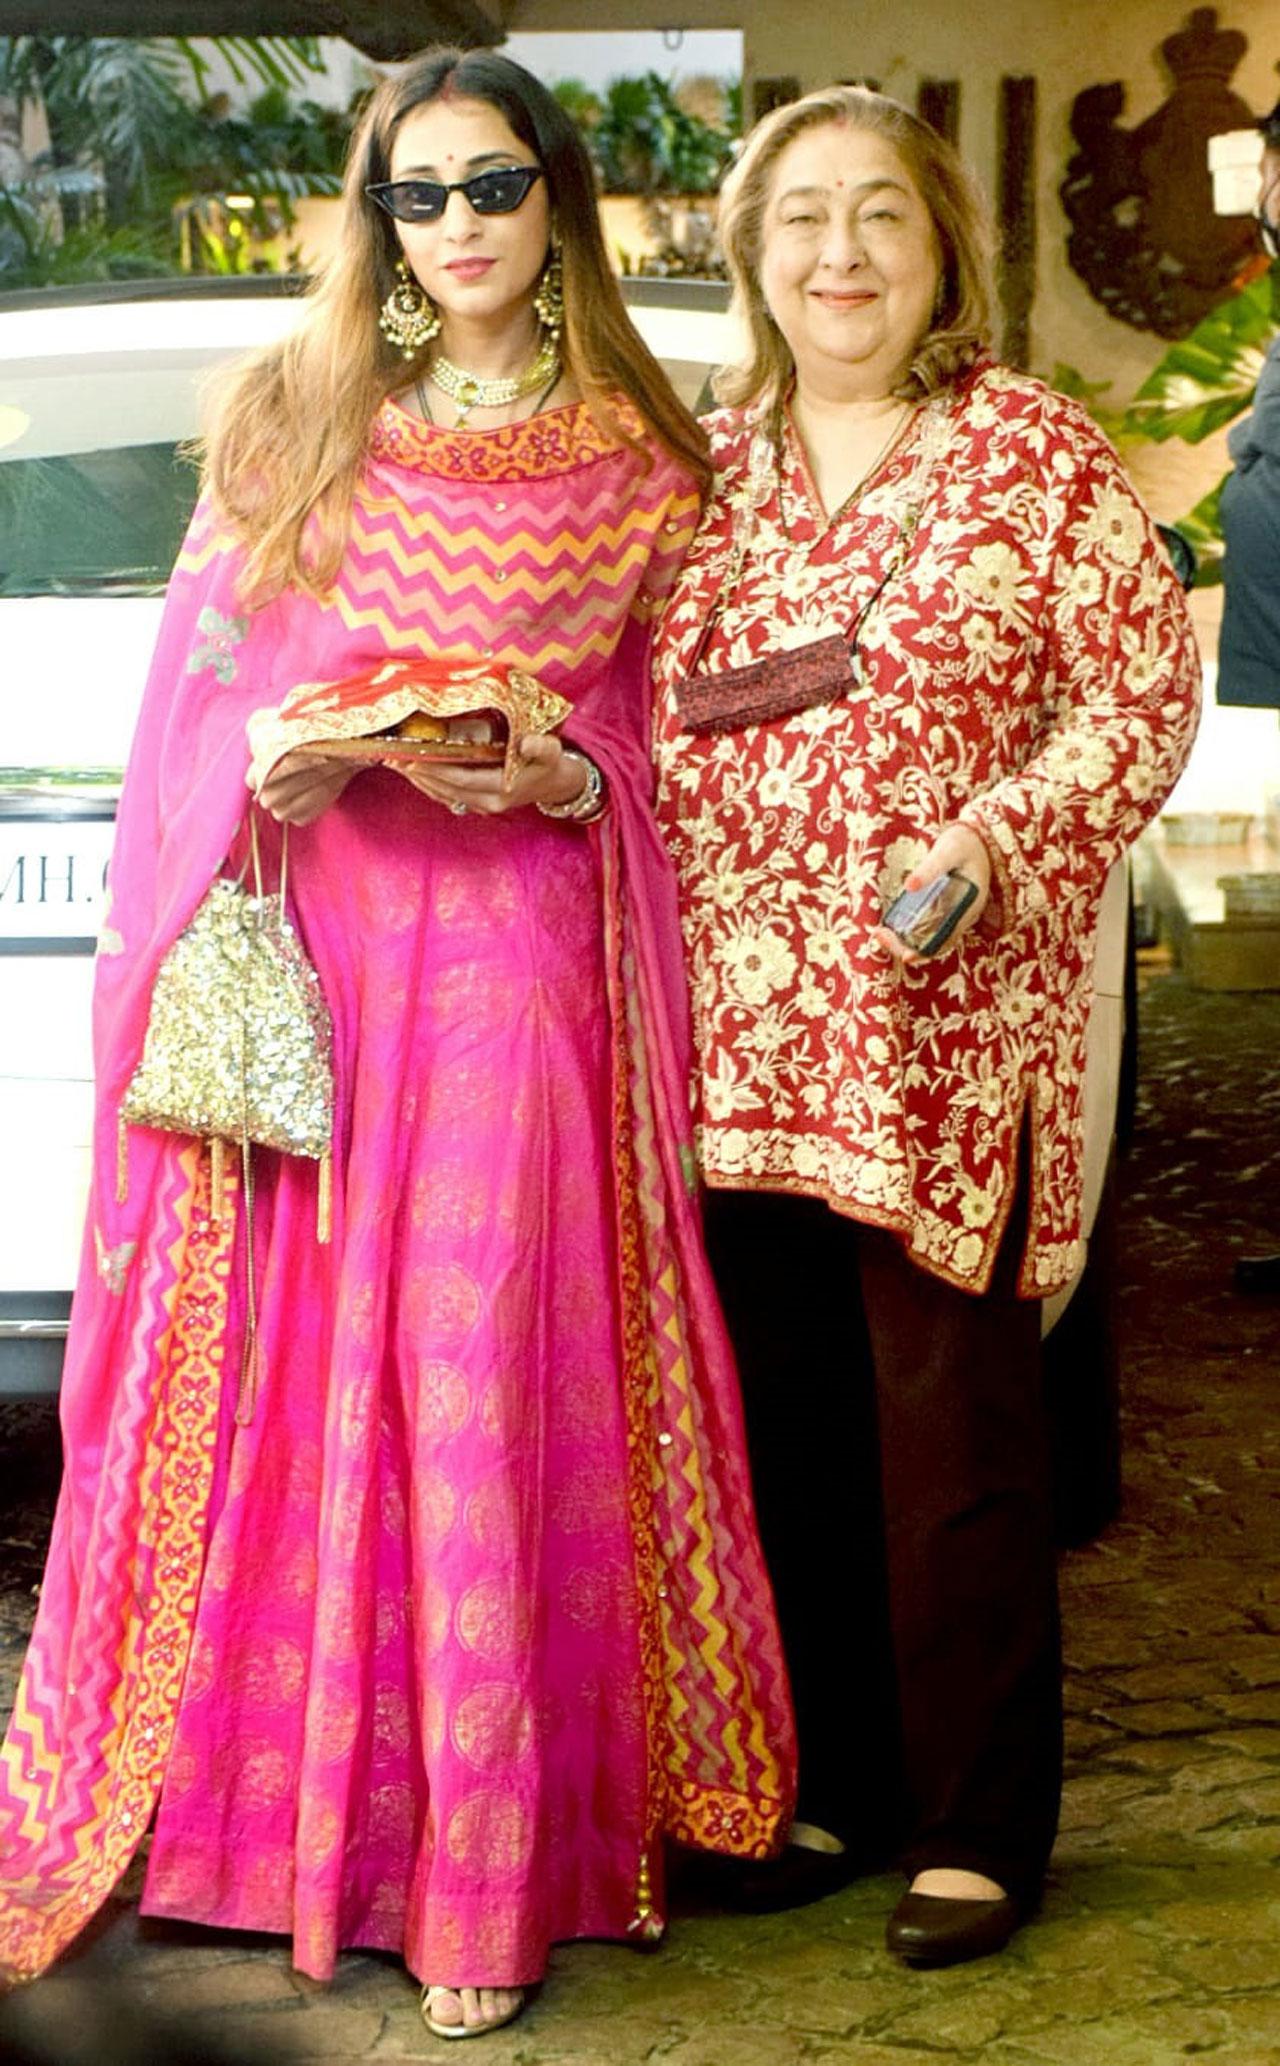 Rima Jain arrived with daughter-in-law Anissa Malhotra who looked beautiful in a pink sharara. A dash of swag with black sunglasses for the Kapoor bahu.